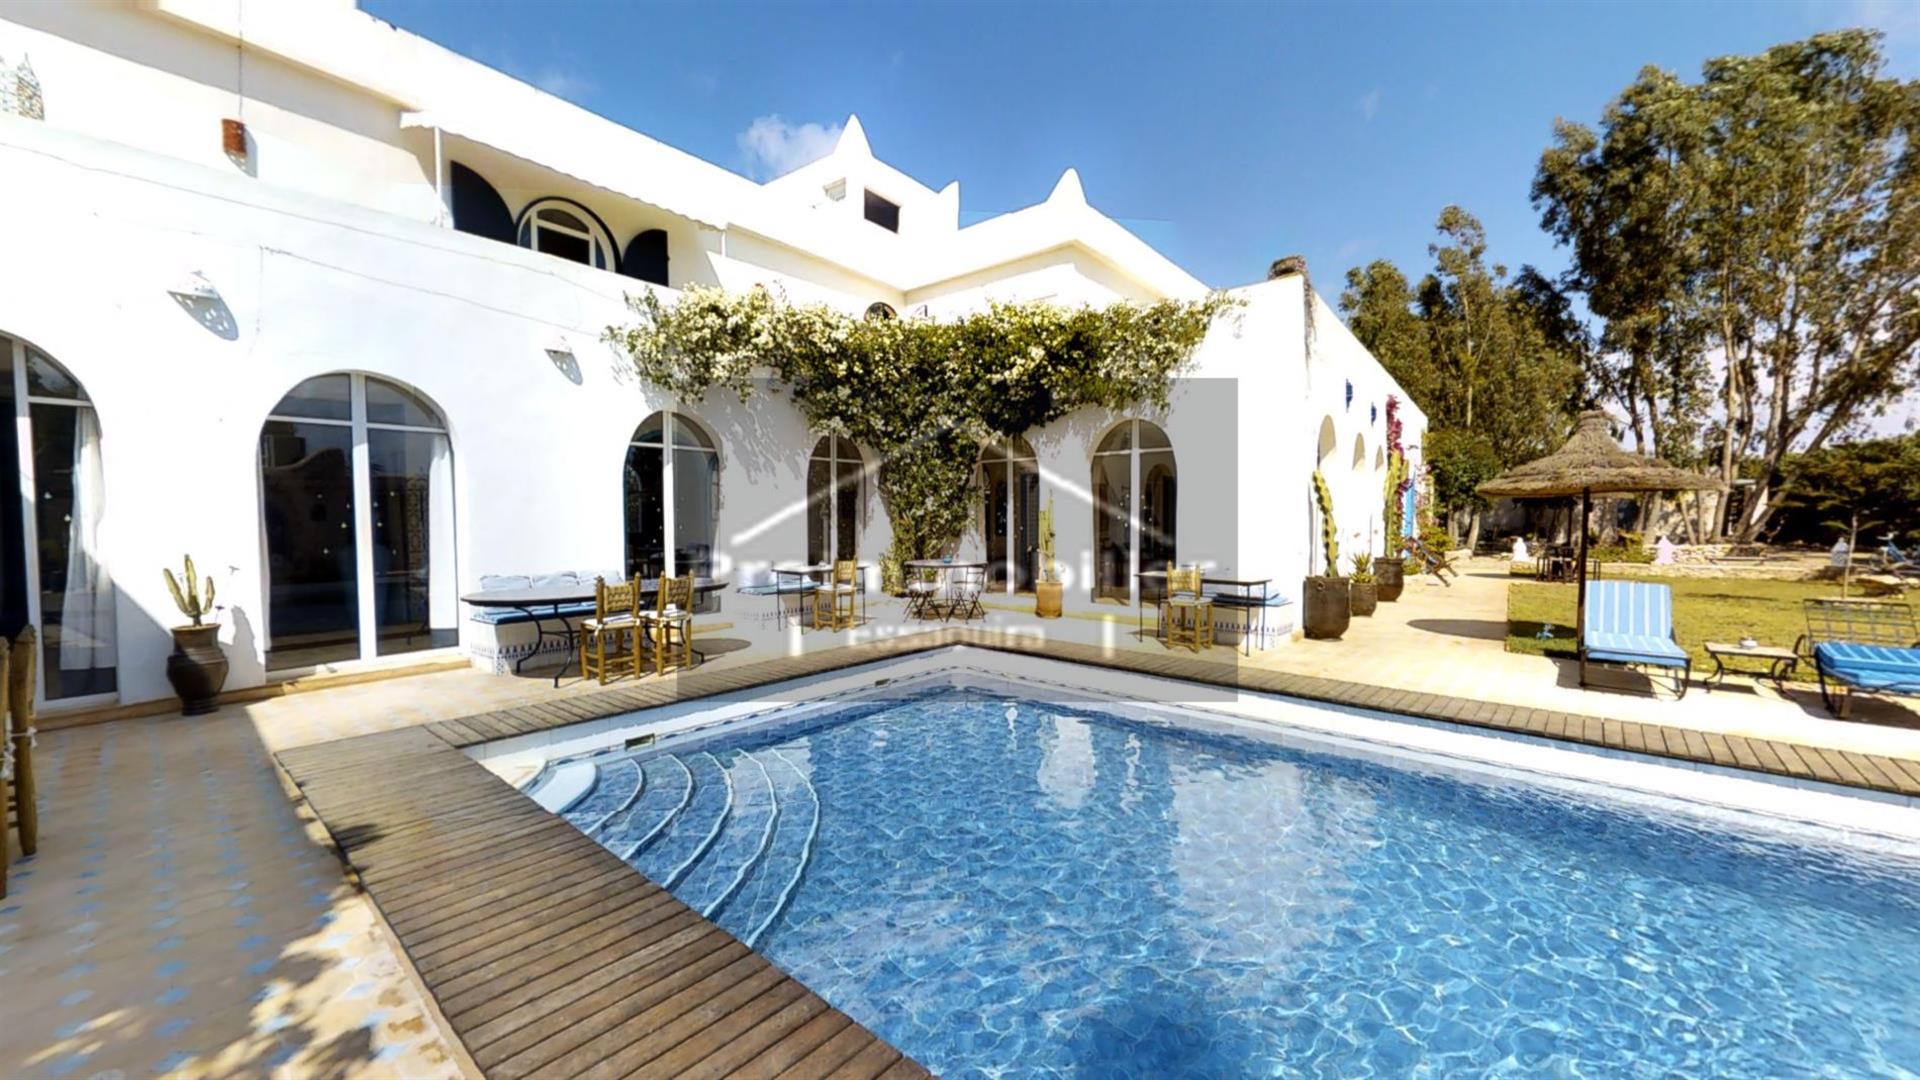 24-04-03-Vmh Beautiful Guest House of 750 m²for sale in Essaouira Garden 4989m²